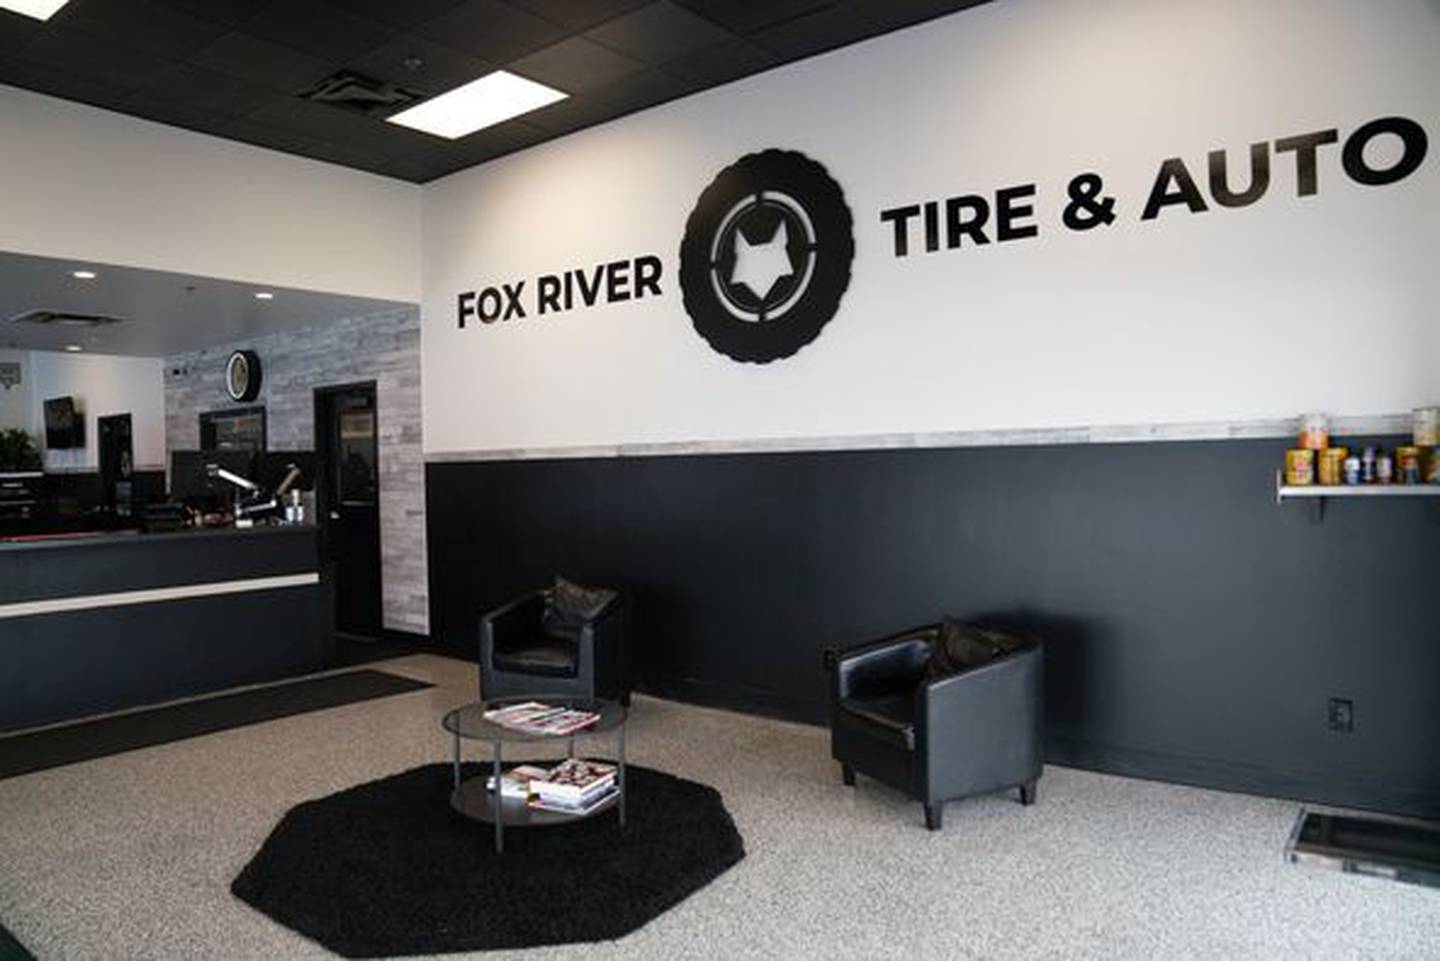 Fox River Tire & Auto offers one of the best oil changes in Kane County. (Fox River Tire & Auto via Facebook)